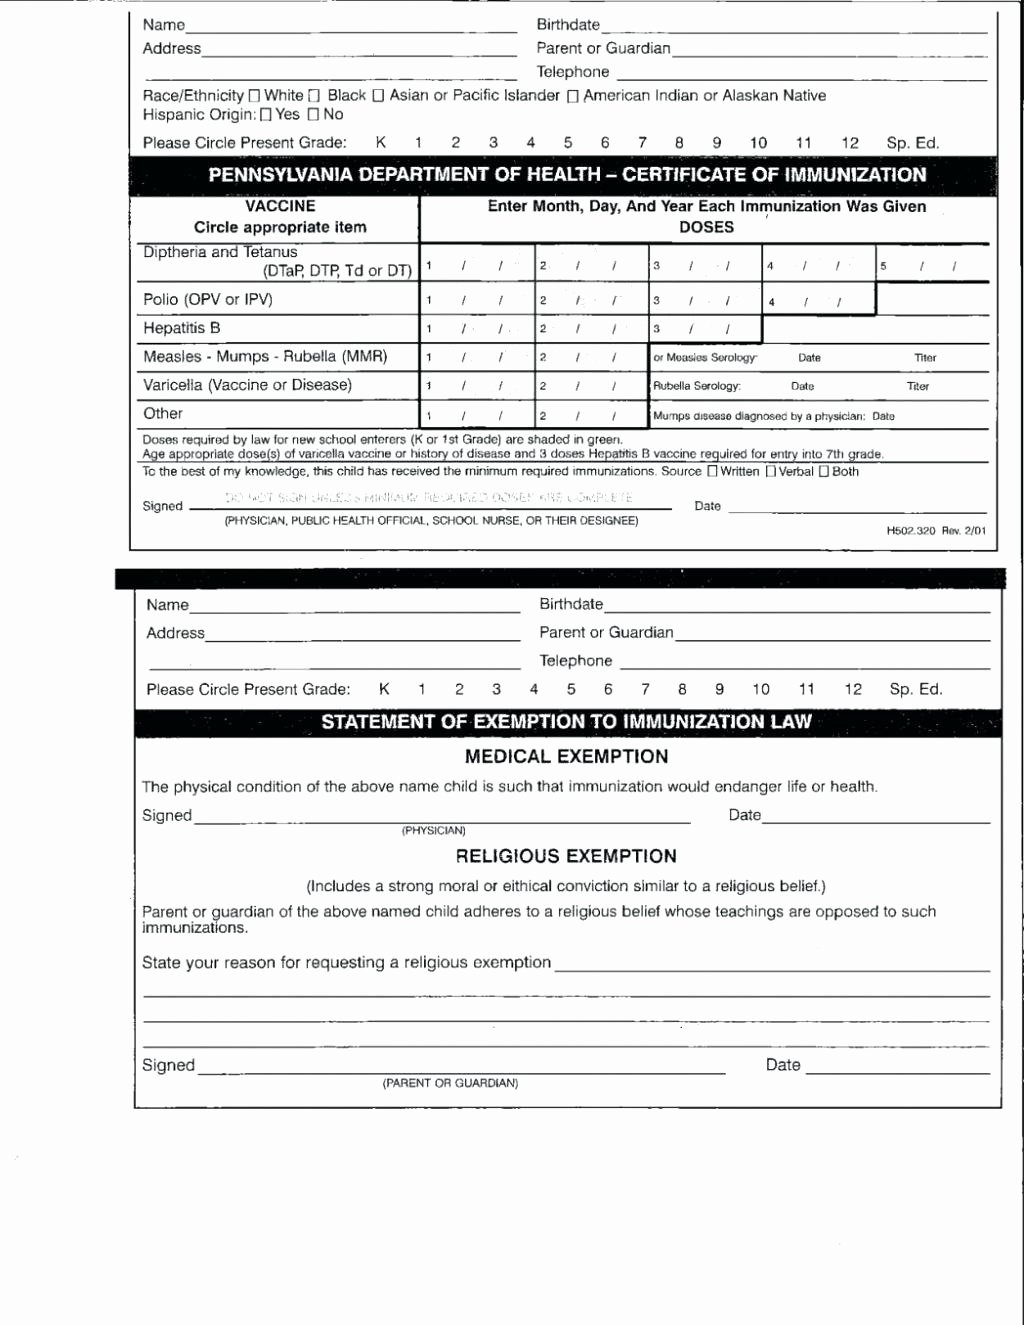 Medical Record forms Template Beautiful Shot Record Templ On Free Personal Health Record